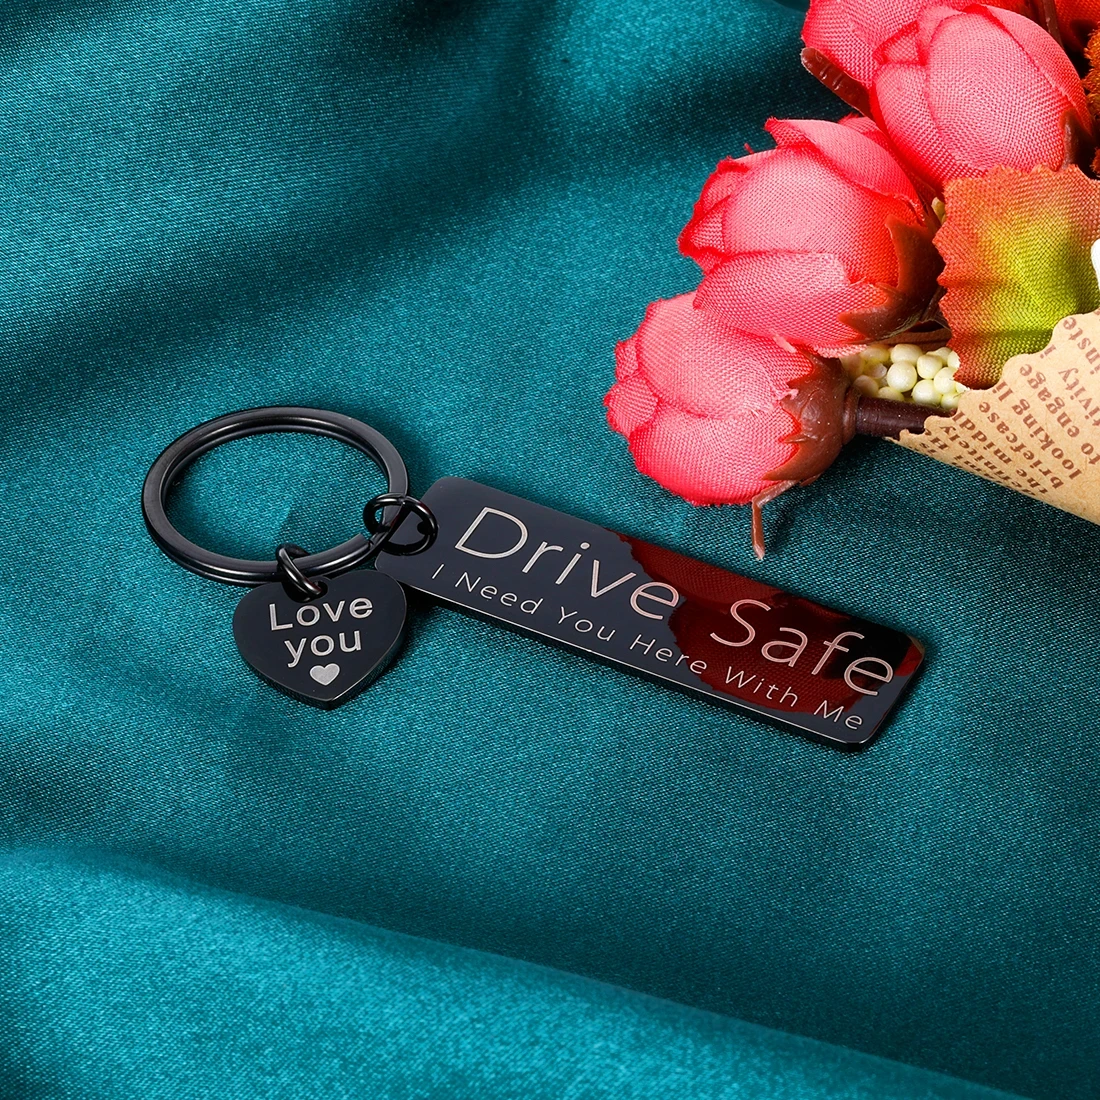 Love You Key Chain Keyrings Gift Drive Safe I Need You Here with Me Keychains Couples Boyfriend Gift for Husband Birthday